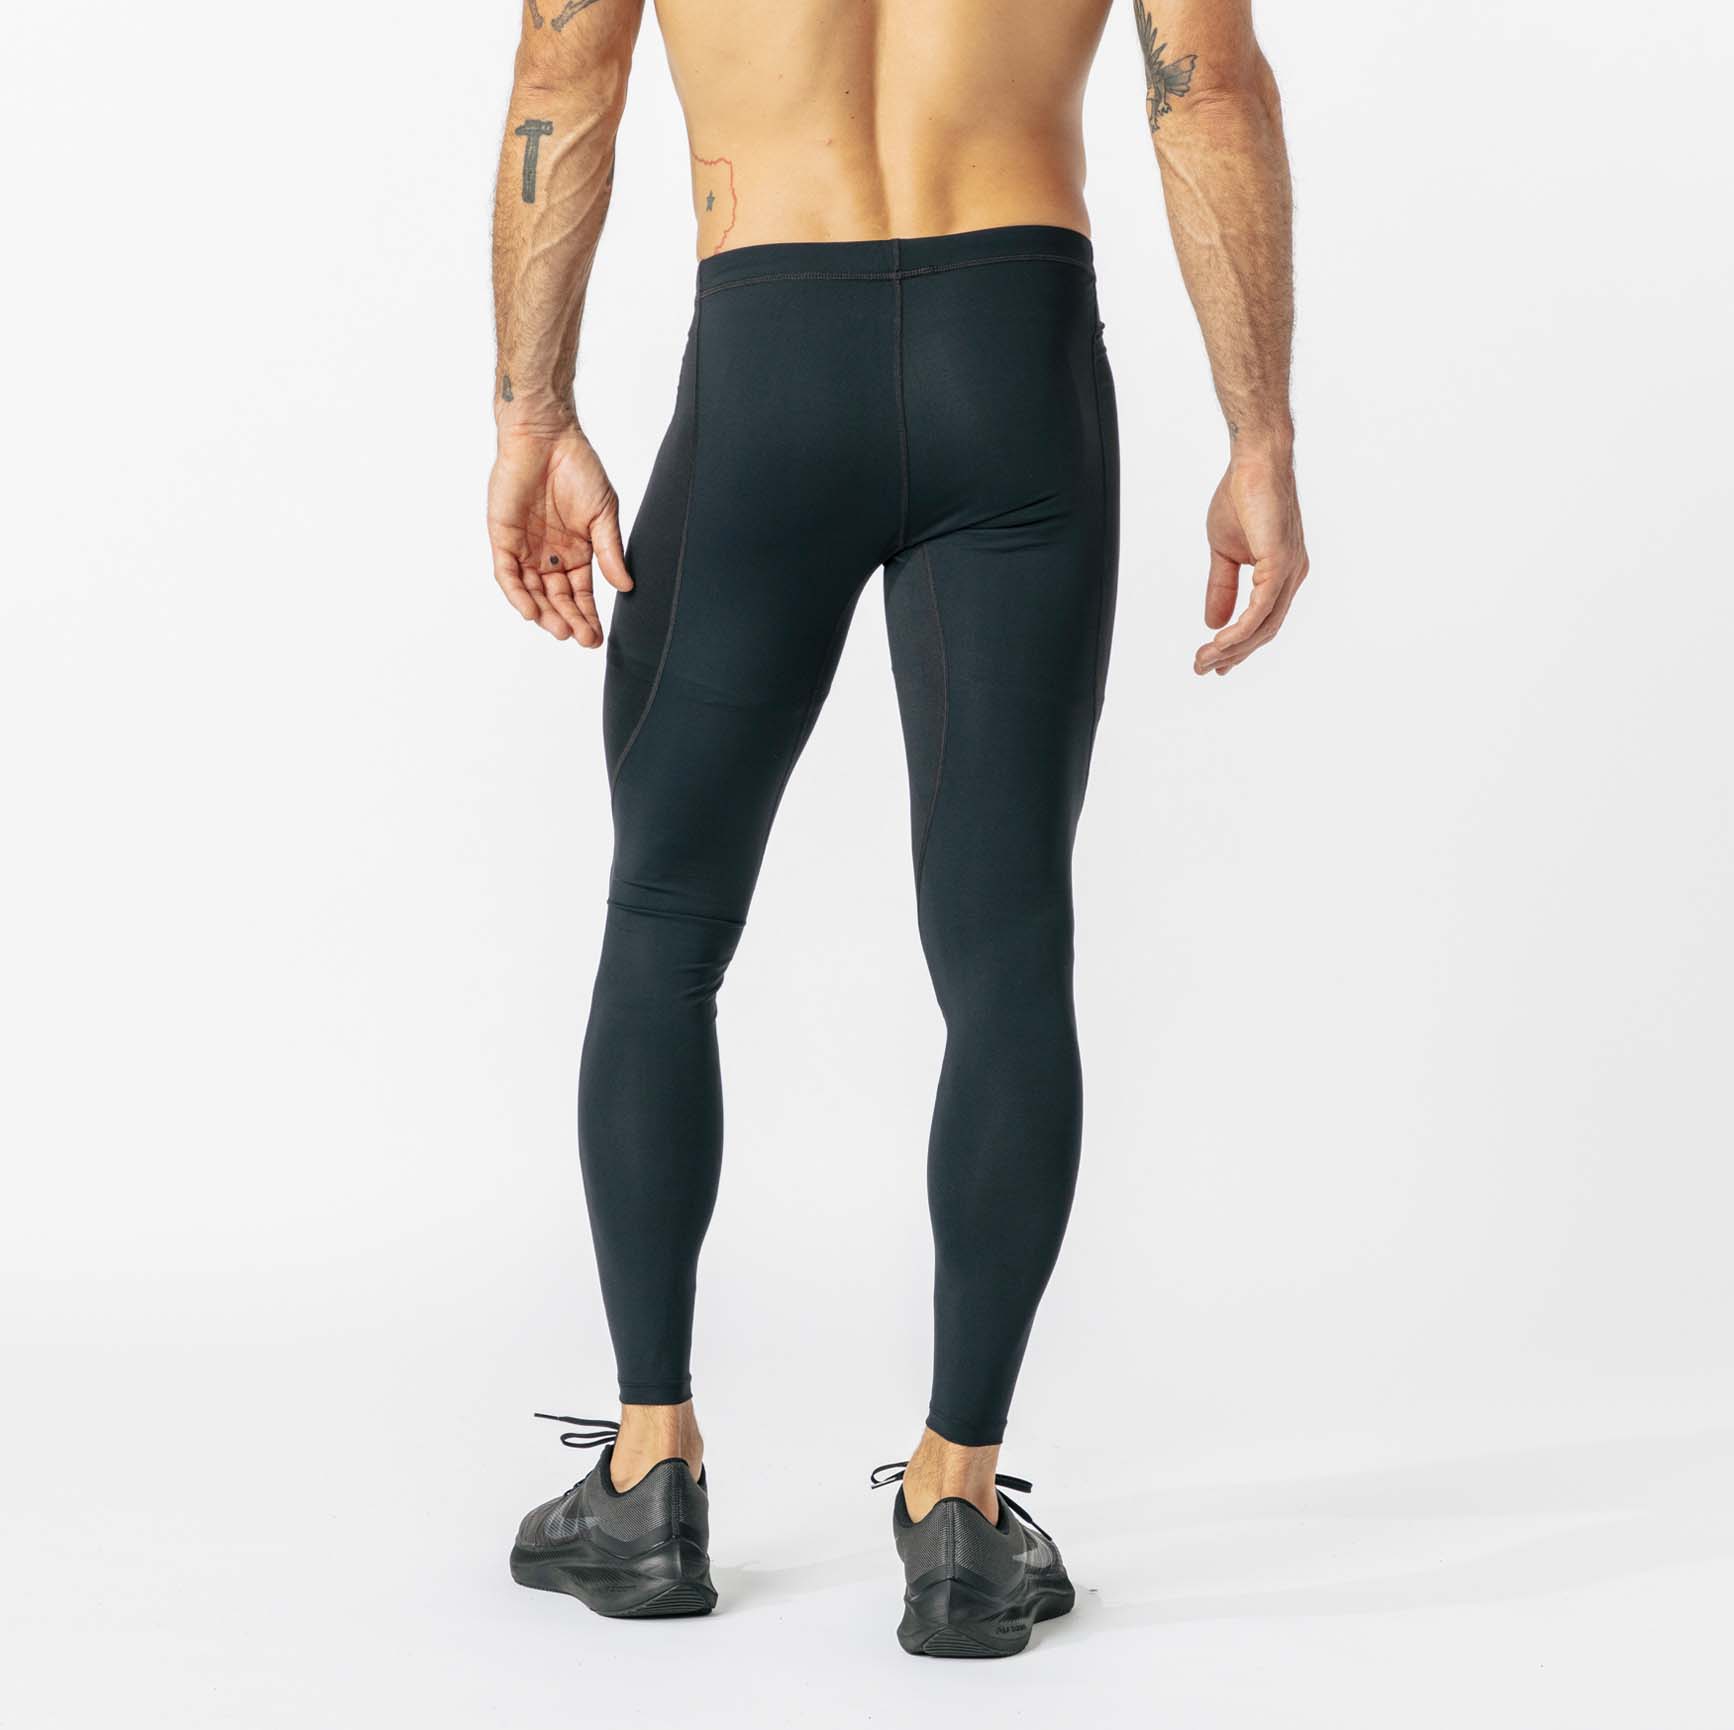 Men's Solid Color Compression Pants Stretchy Tights Thermal Long